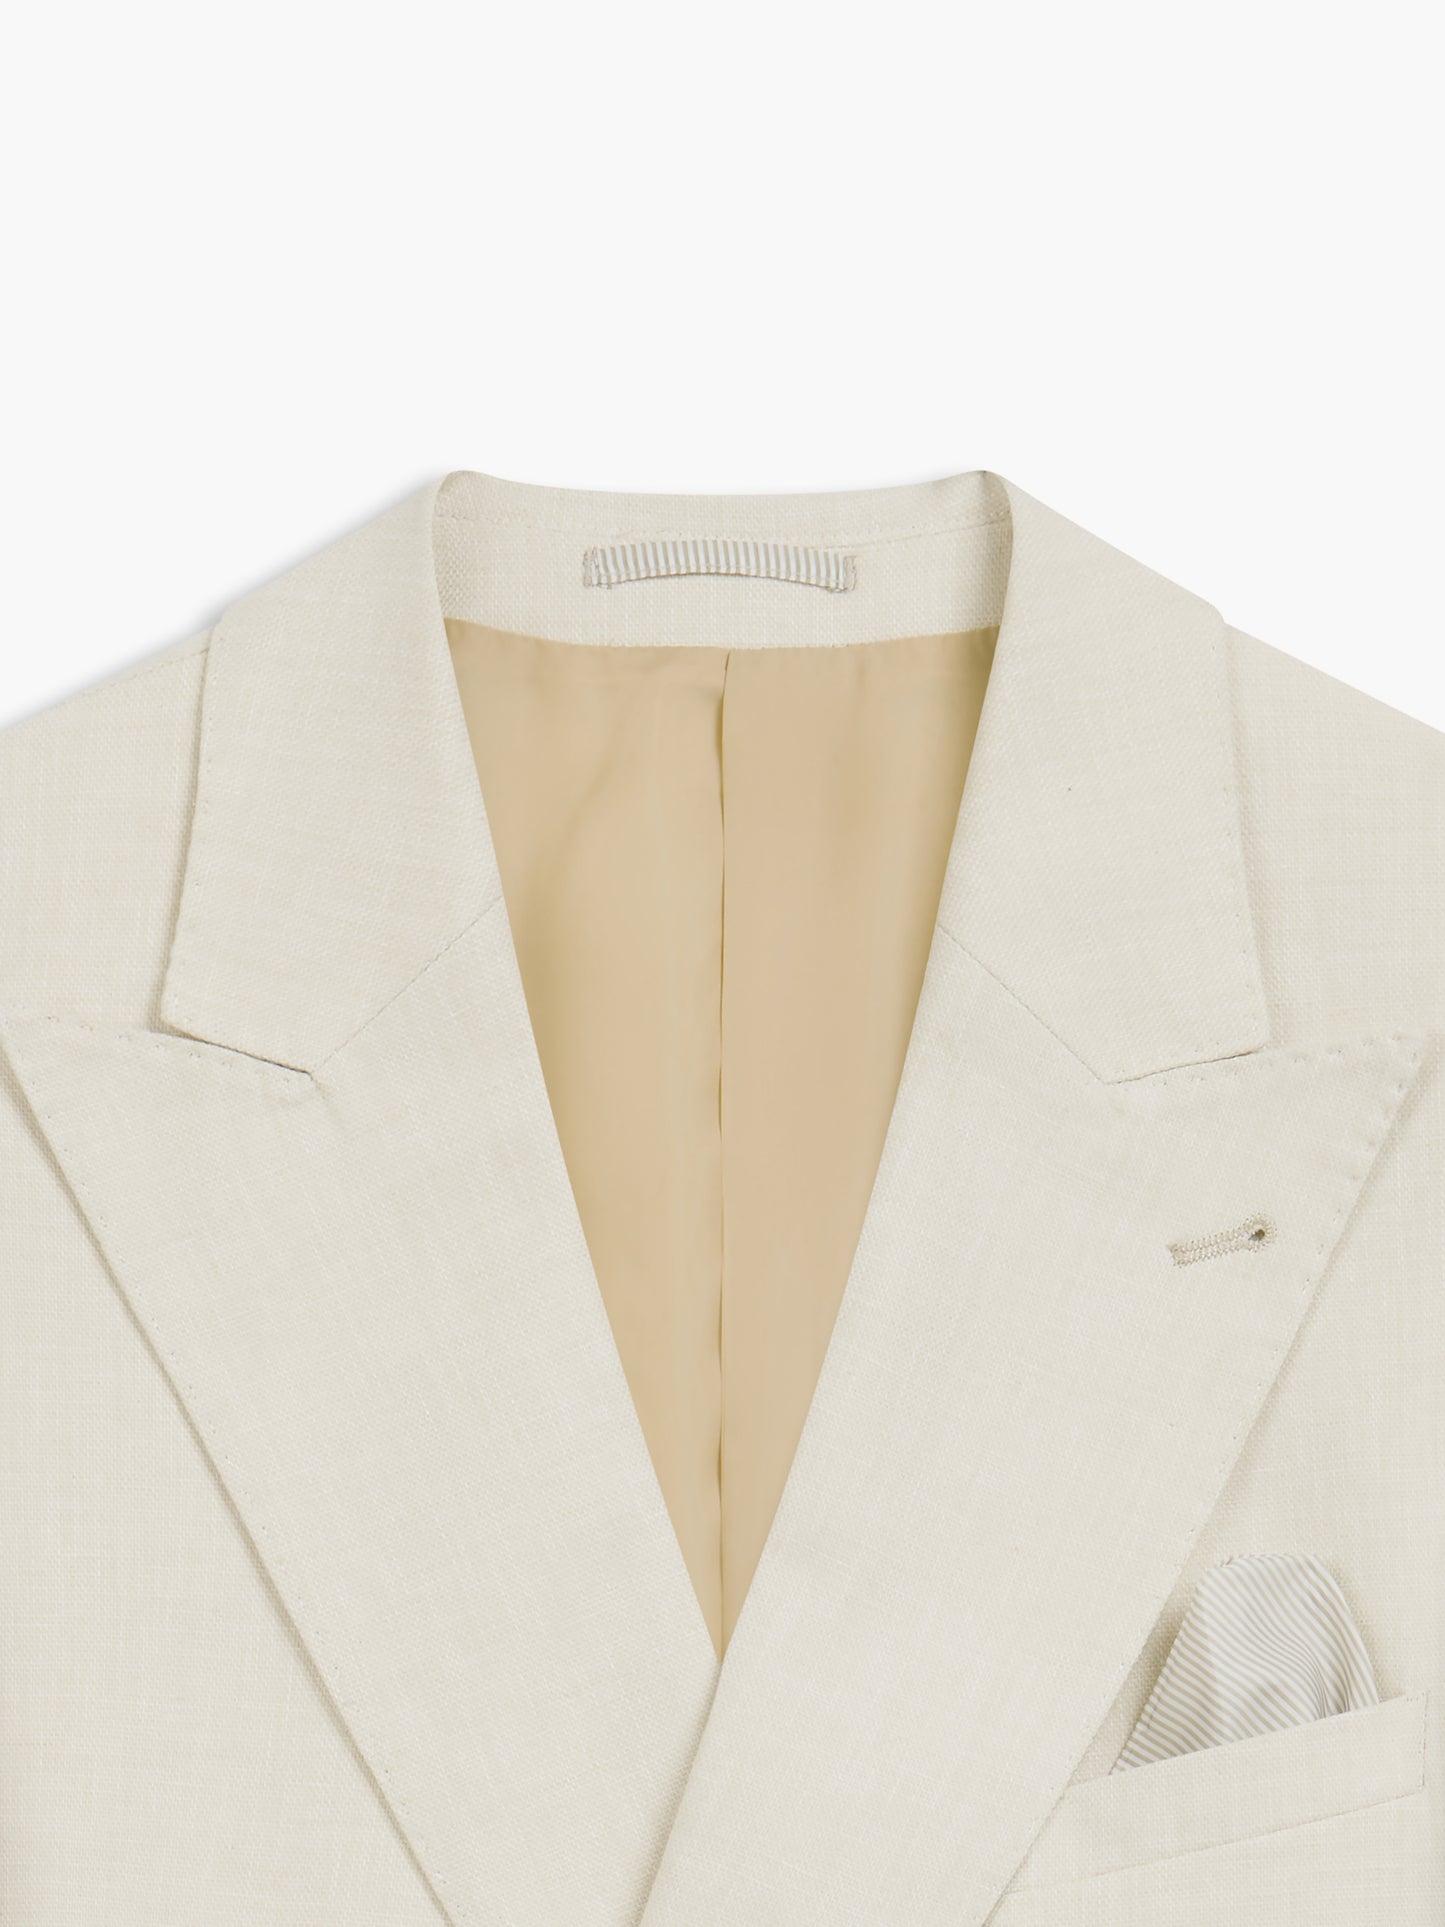 Image 7 of Slim Fit Double Breasted Linen Suit Jacket in Ecru